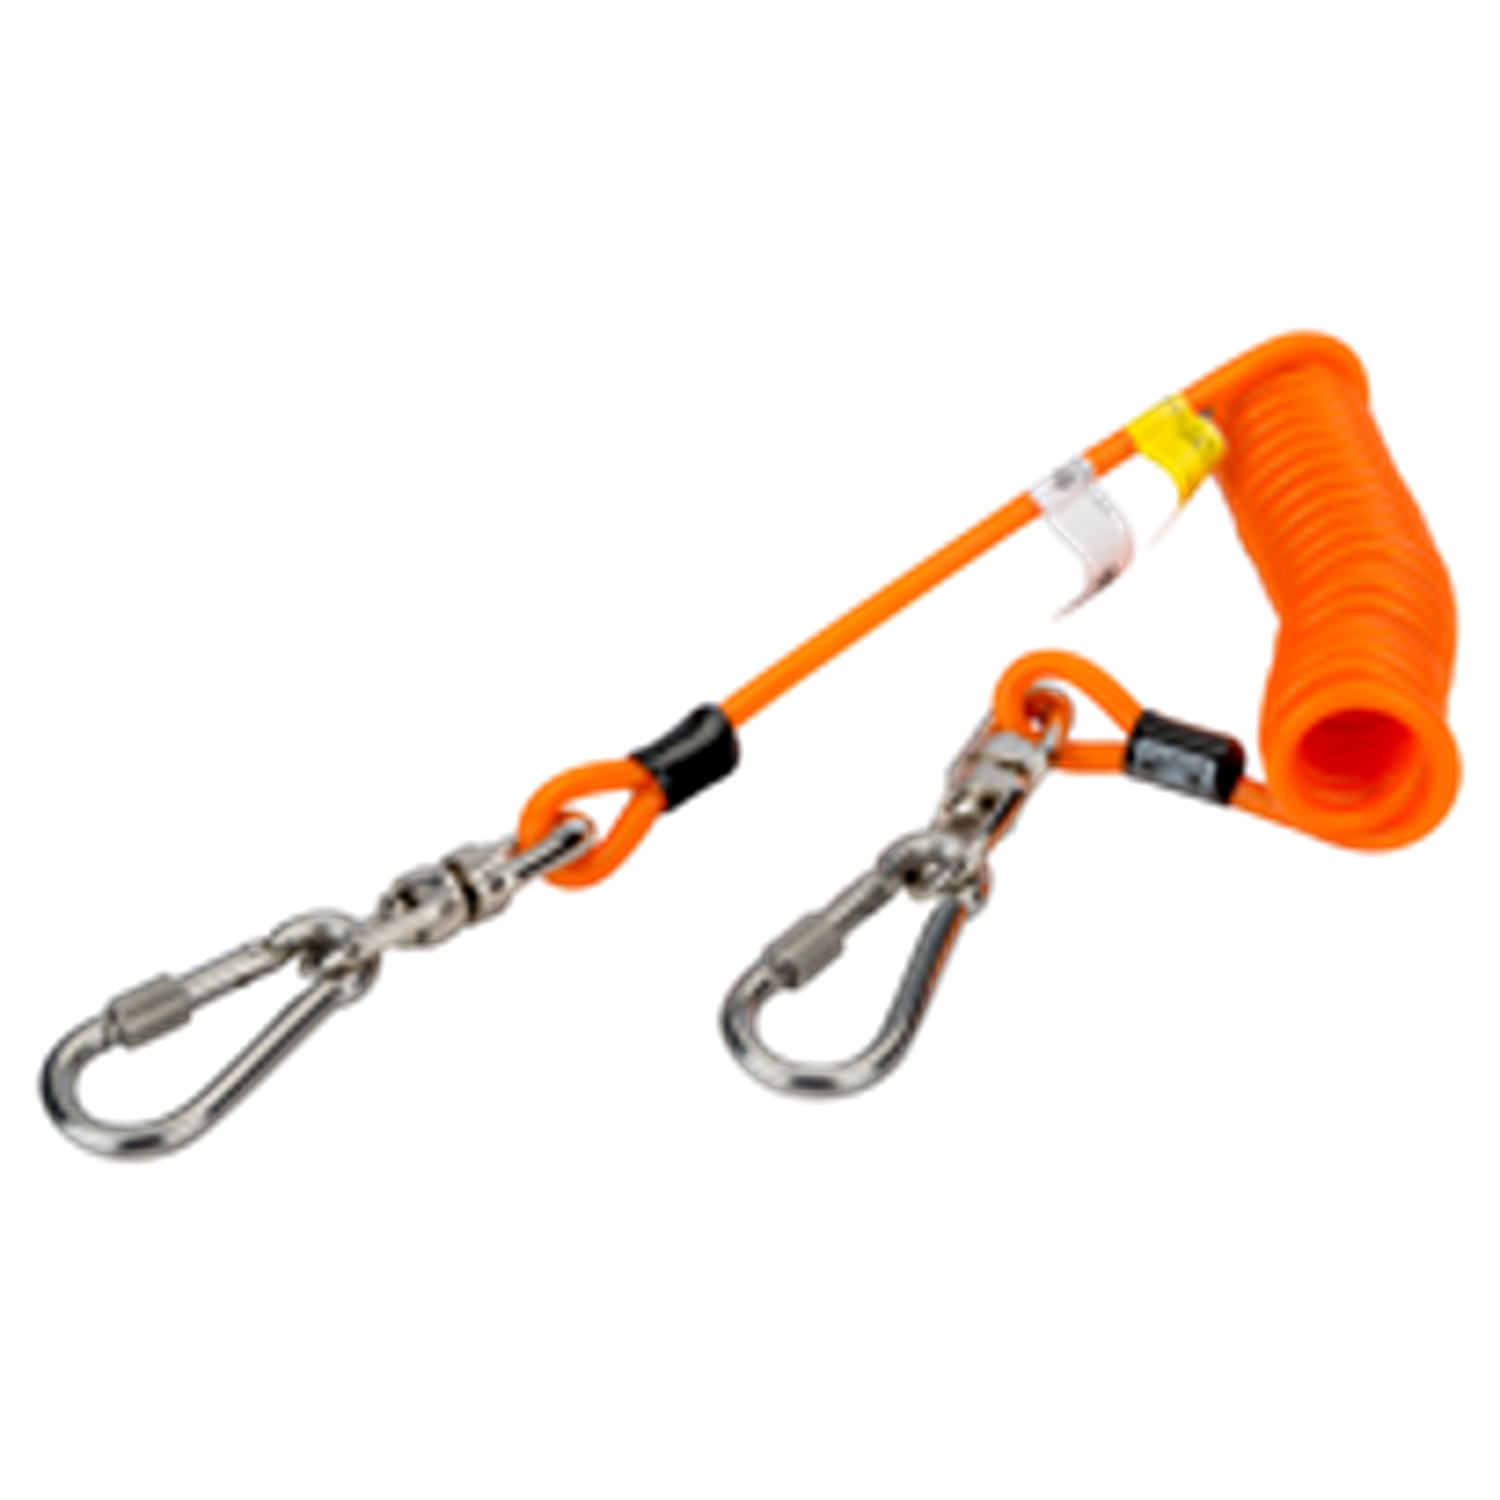 BAHCO 439000003 Coiled Lanyard with Swivel Carabiner 3 kg - Premium Coiled Lanyard from BAHCO - Shop now at Yew Aik.